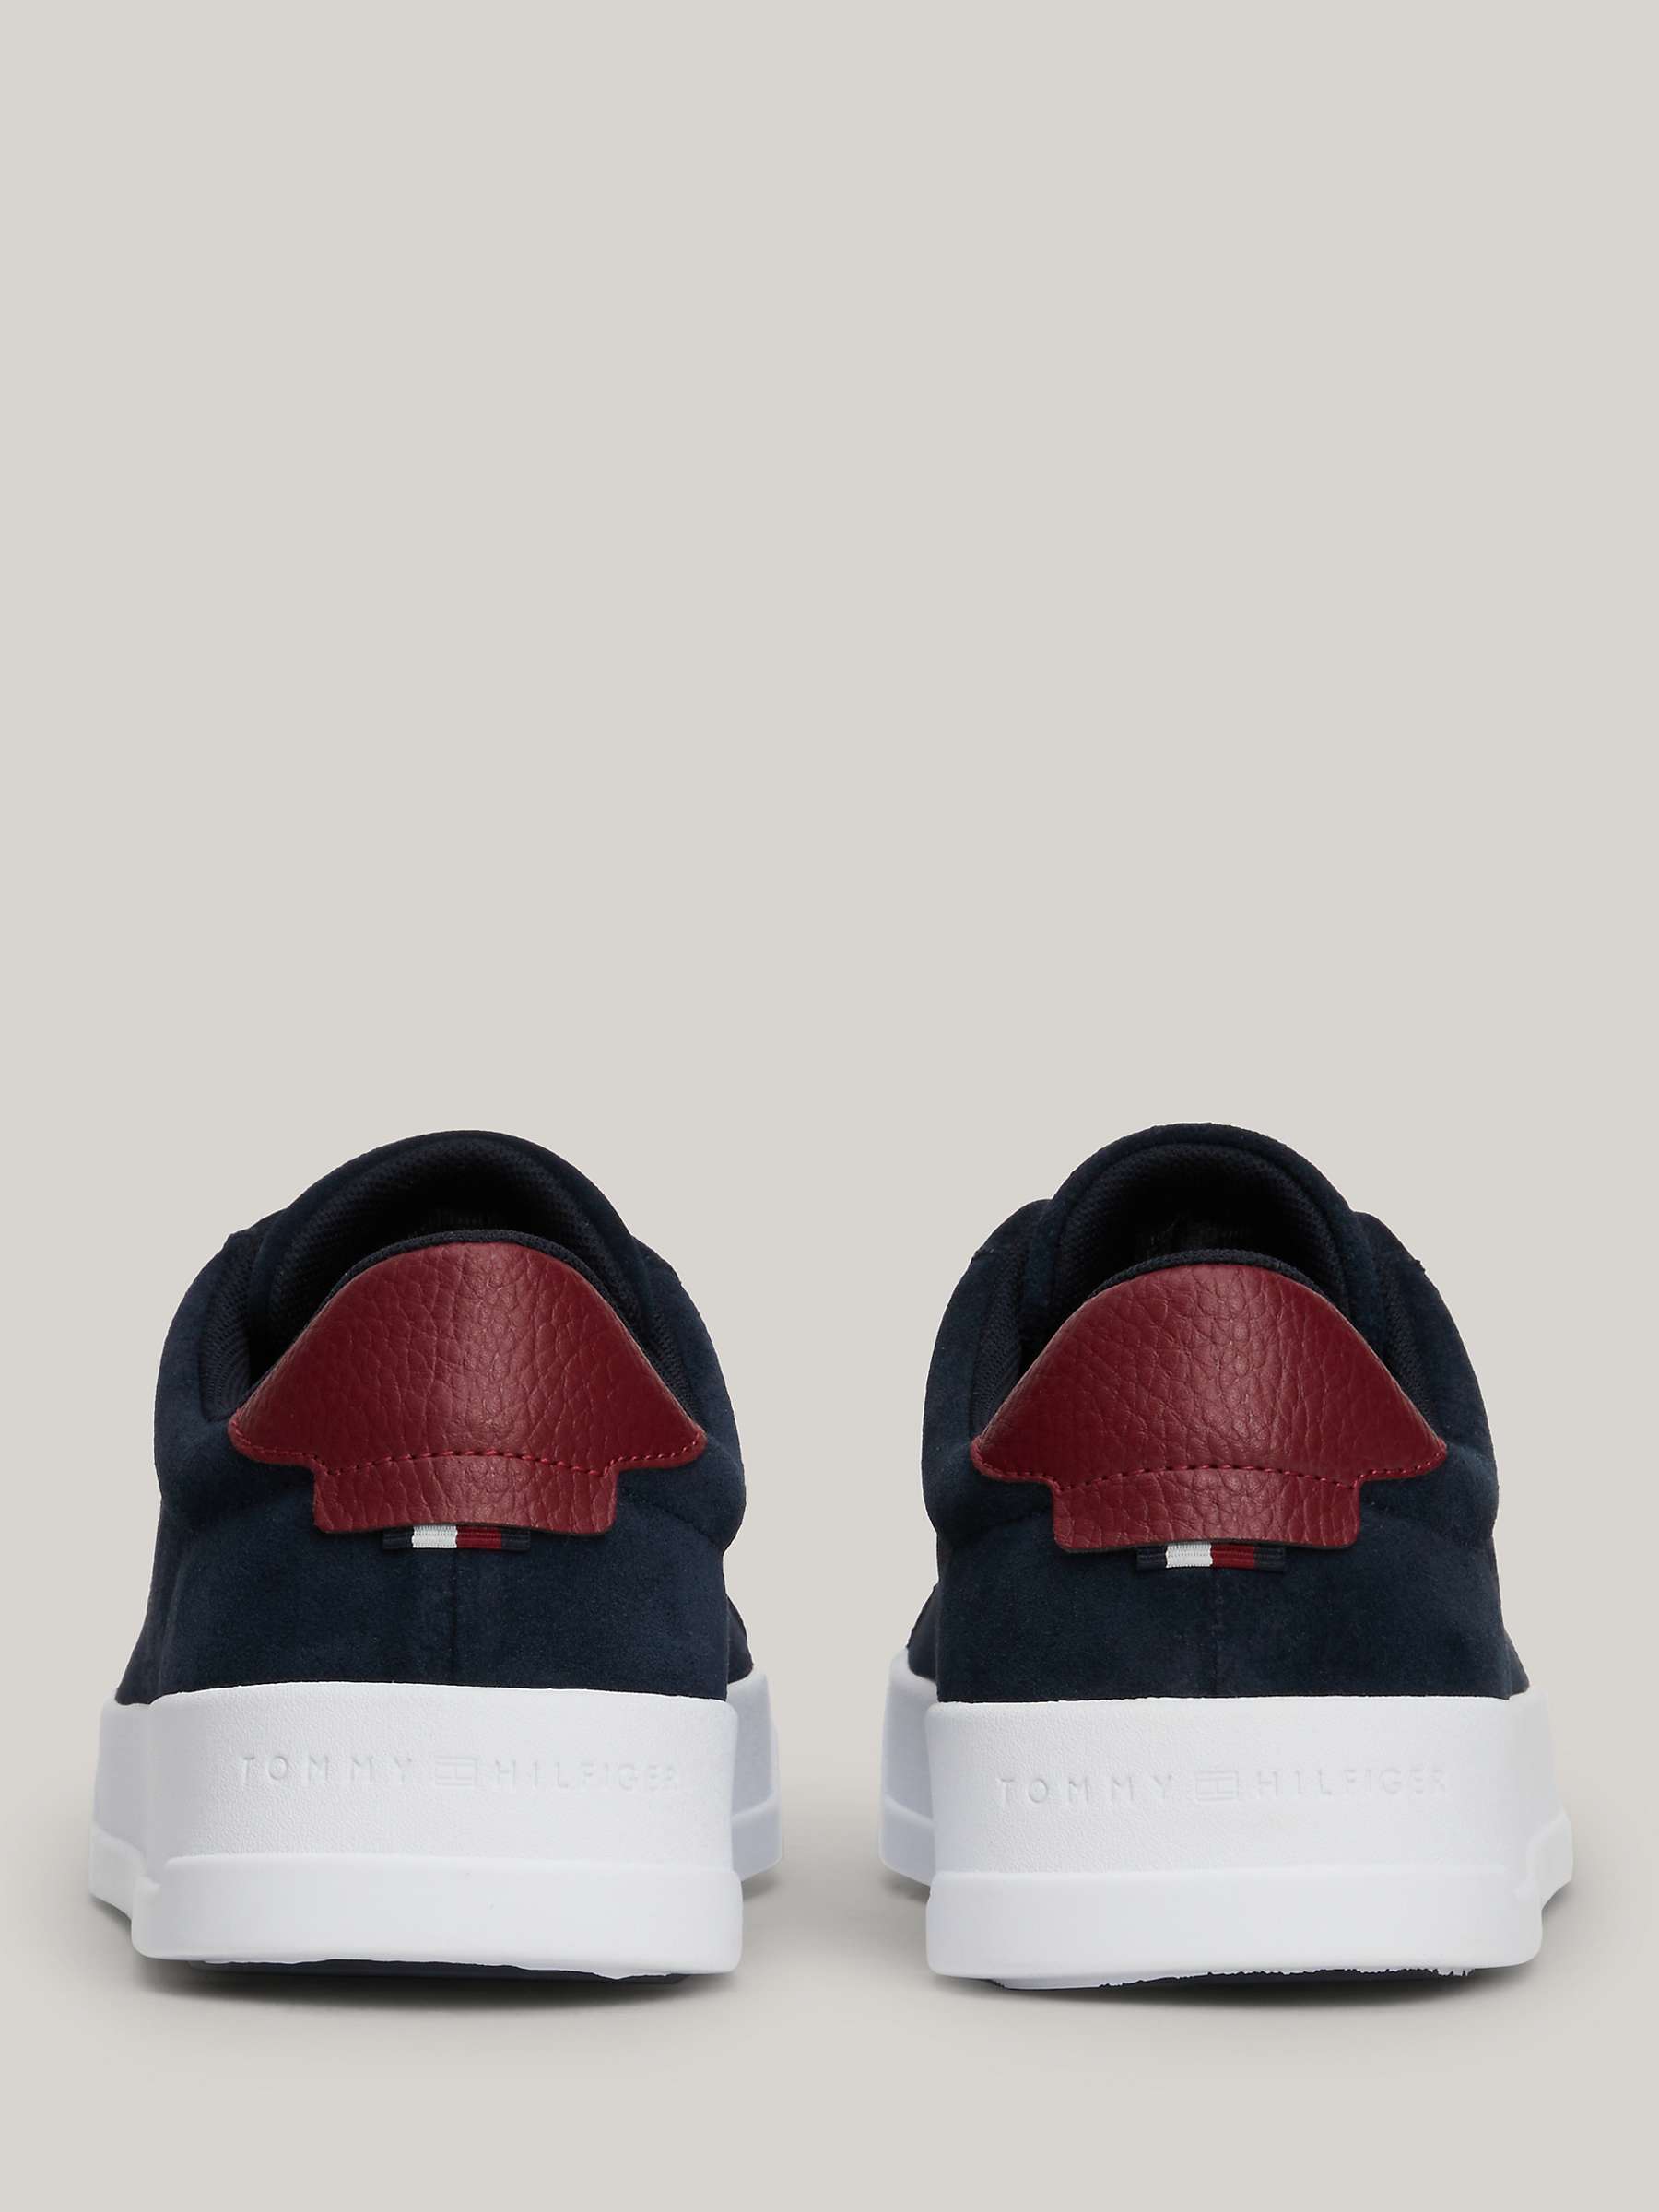 Buy Tommy Hilfiger Court Suede Low Top Trainers Online at johnlewis.com